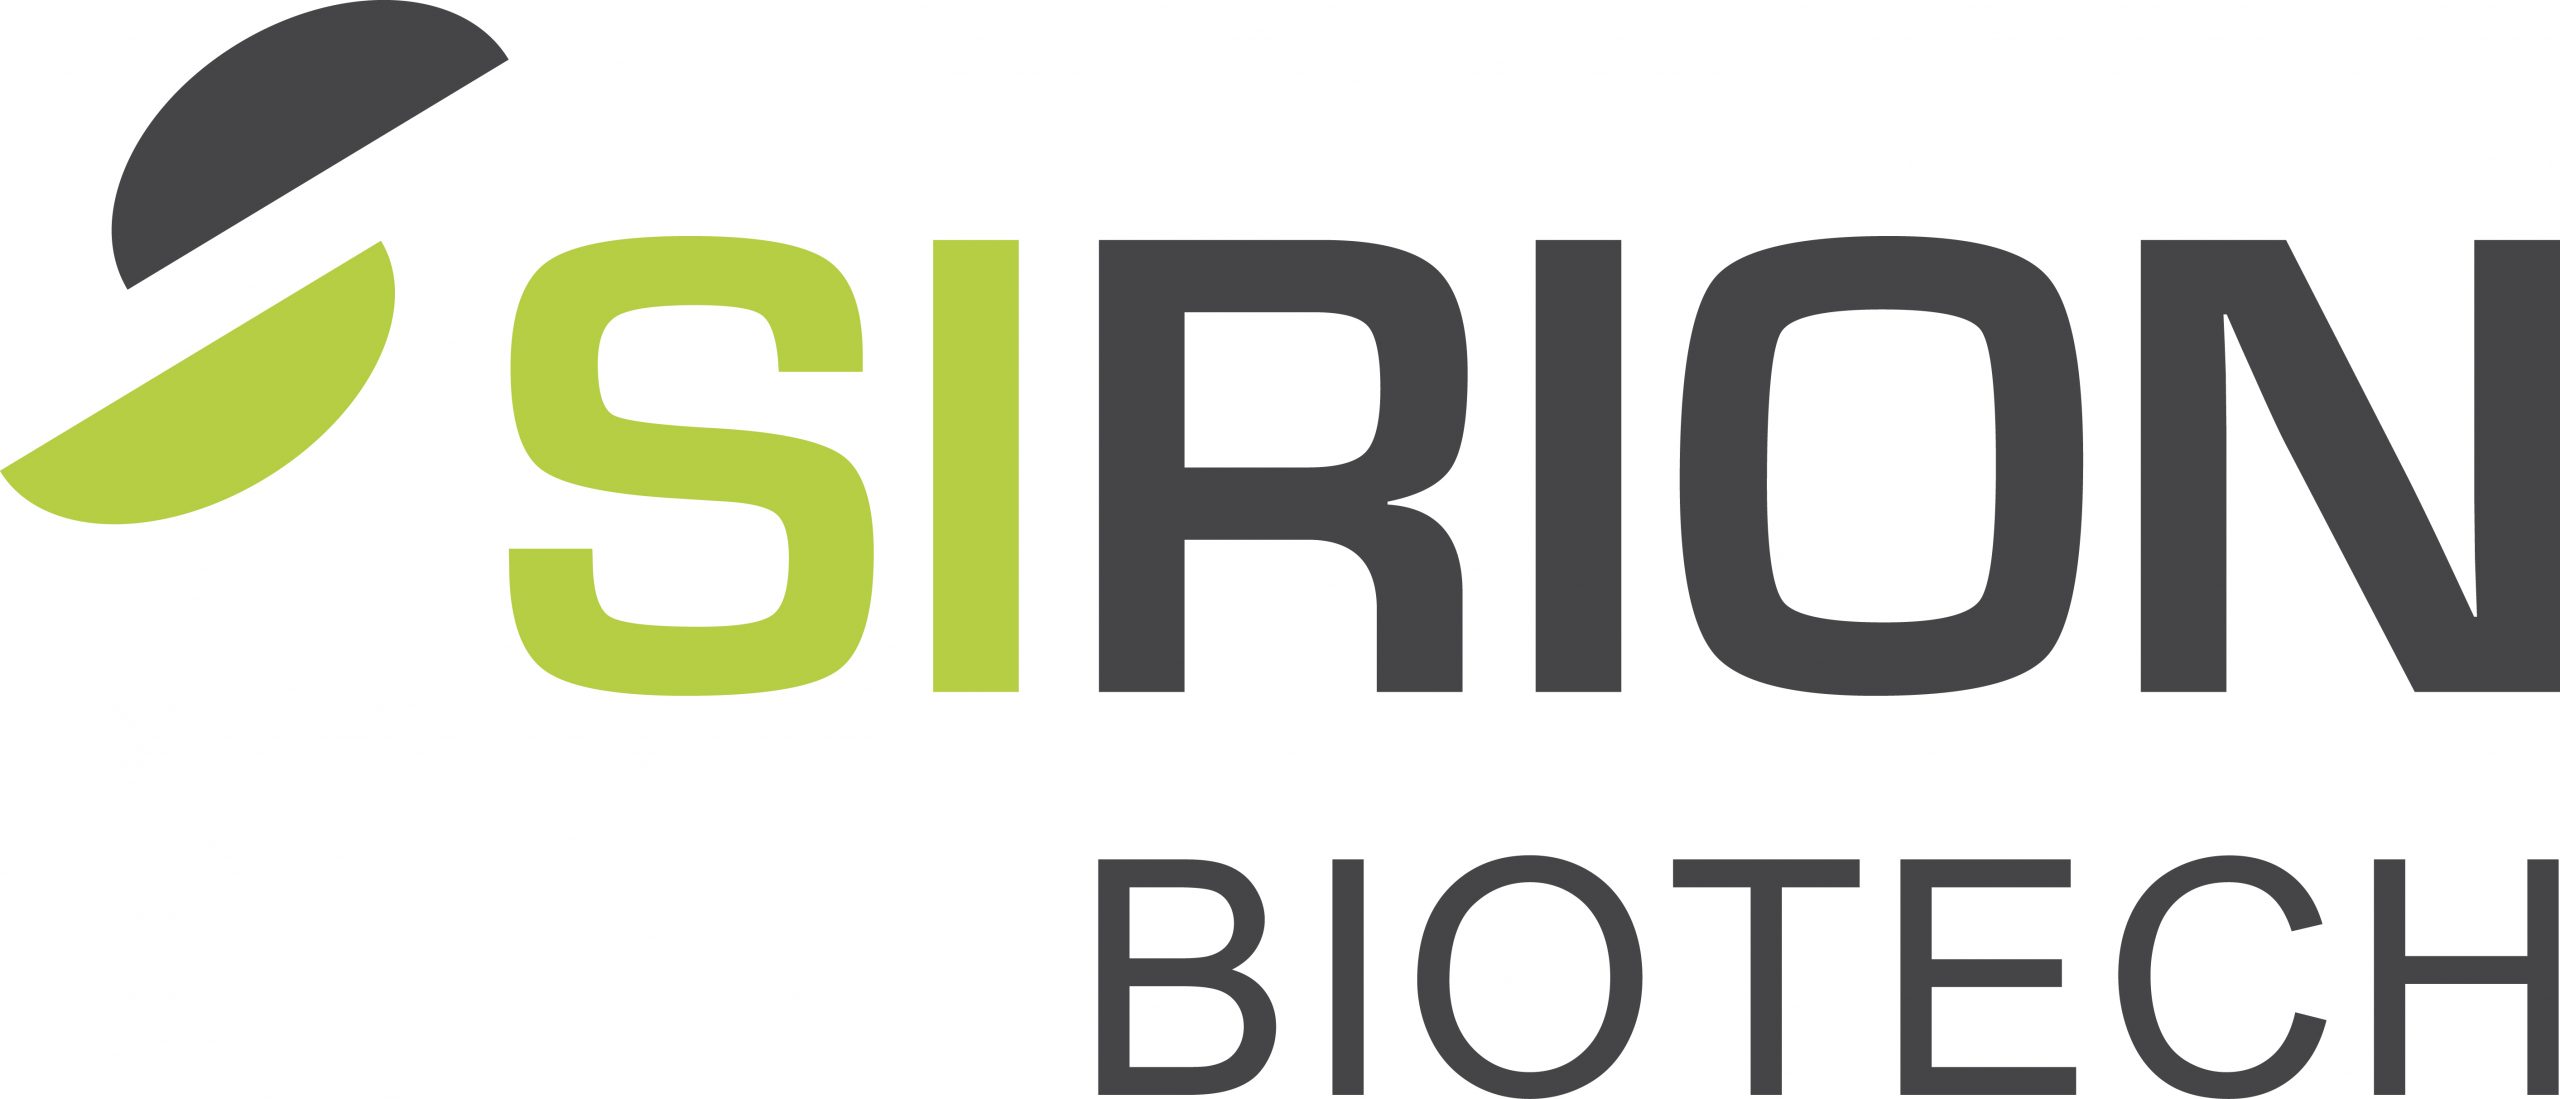 PerkinElmer agrees to acquire SIRION Biotech